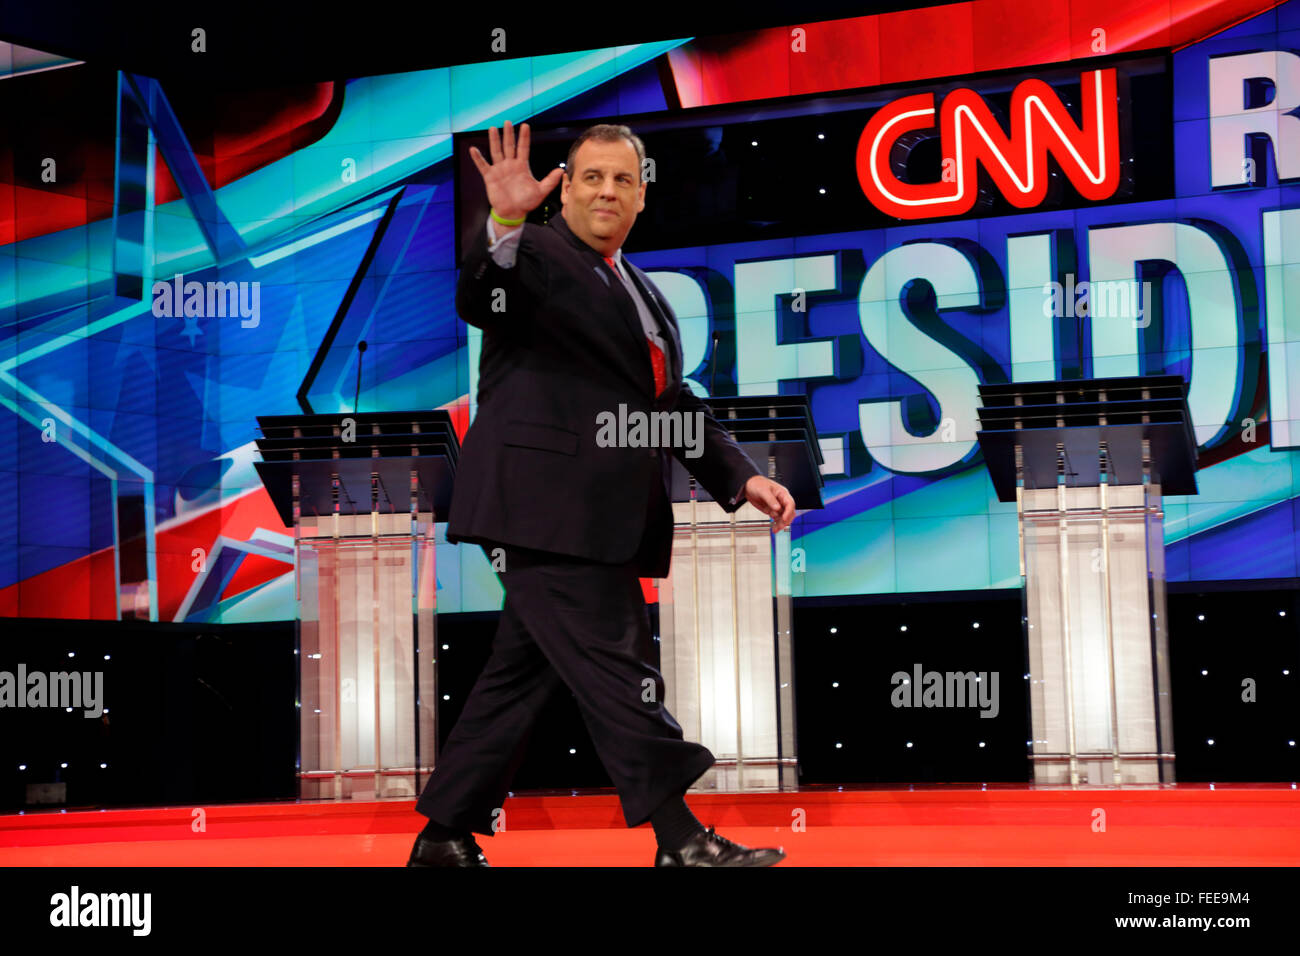 LAS VEGAS, NV, Dec 15, 2015, NJ Gov. Chris Christie a 2016 presidential candidate, waves on stage at the start of the Republican presidential candidate debate at The Venetian. Stock Photo